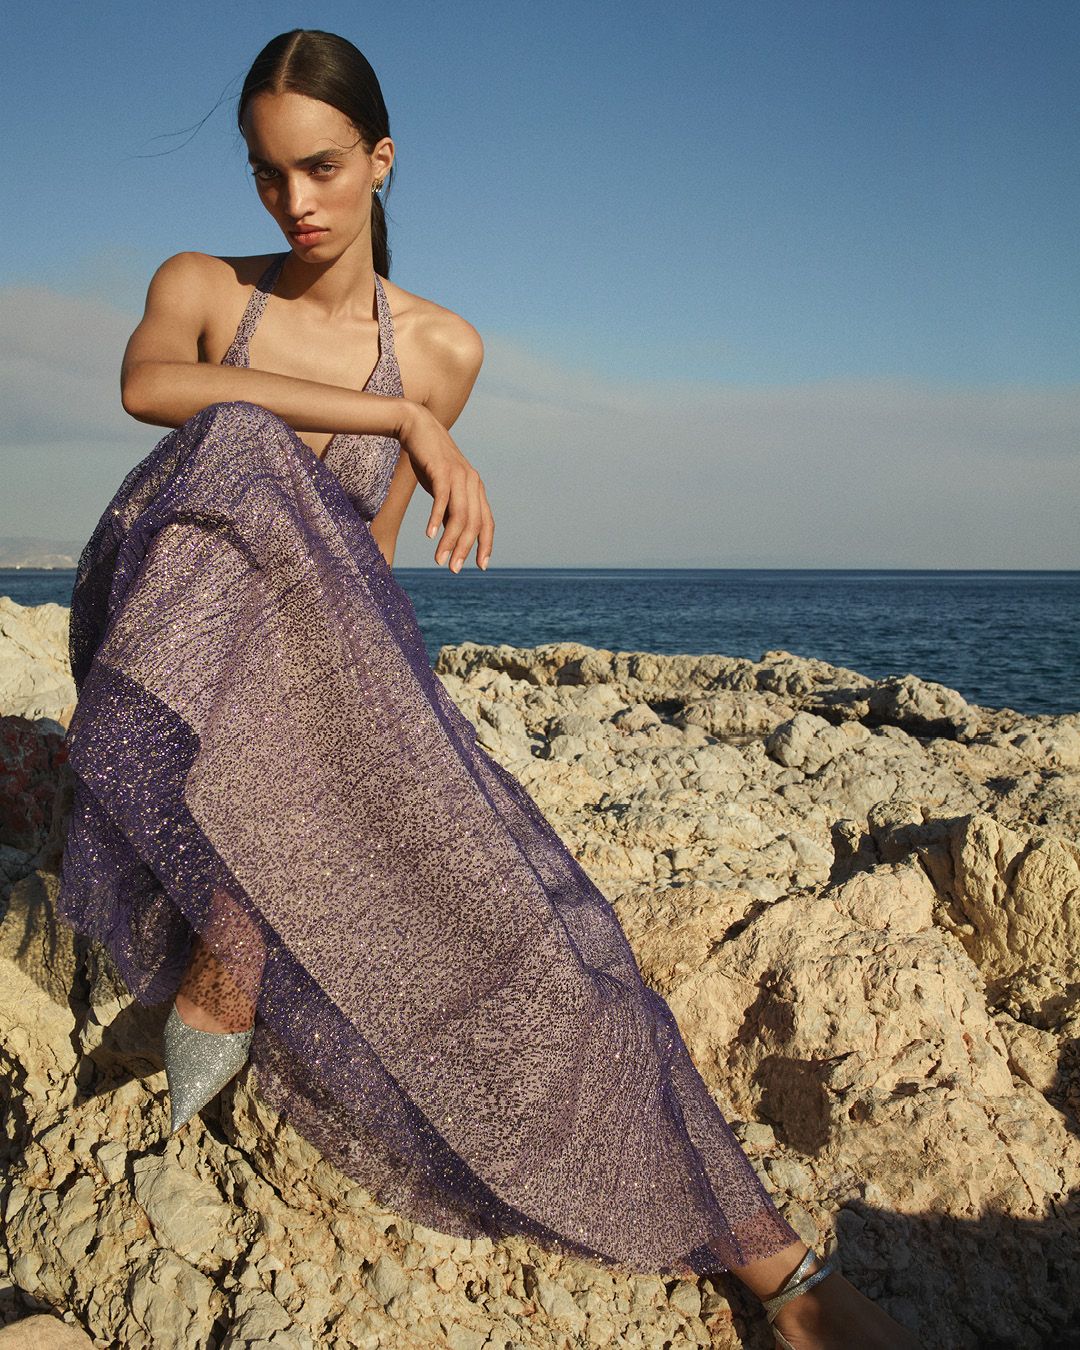 Model wearing a purple sparkly tulle gown sitting on rocks with the ocean in the background